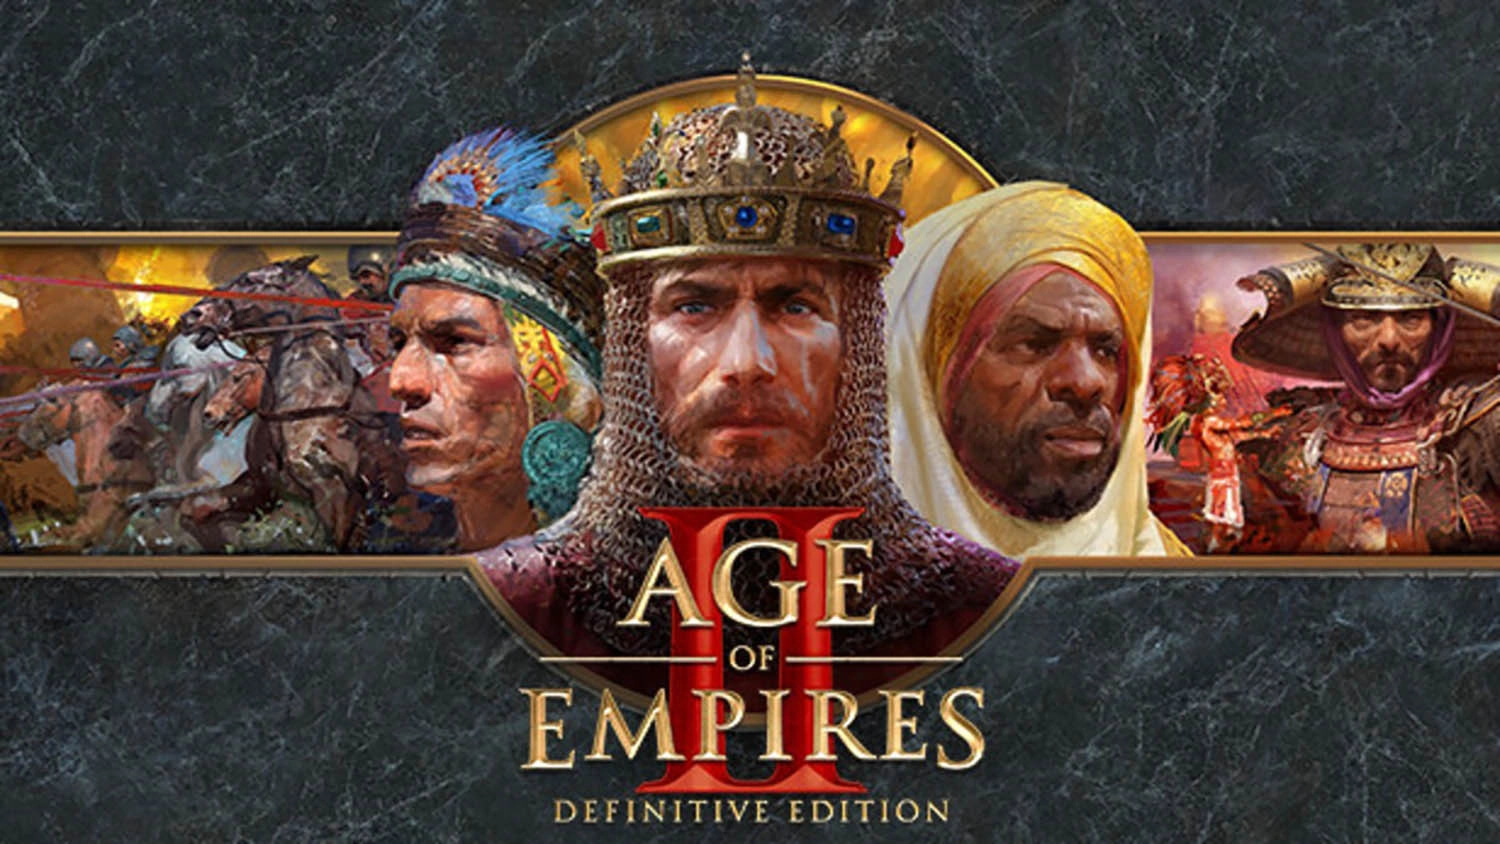 game chiến thuật: Age of Empire: Đế chế